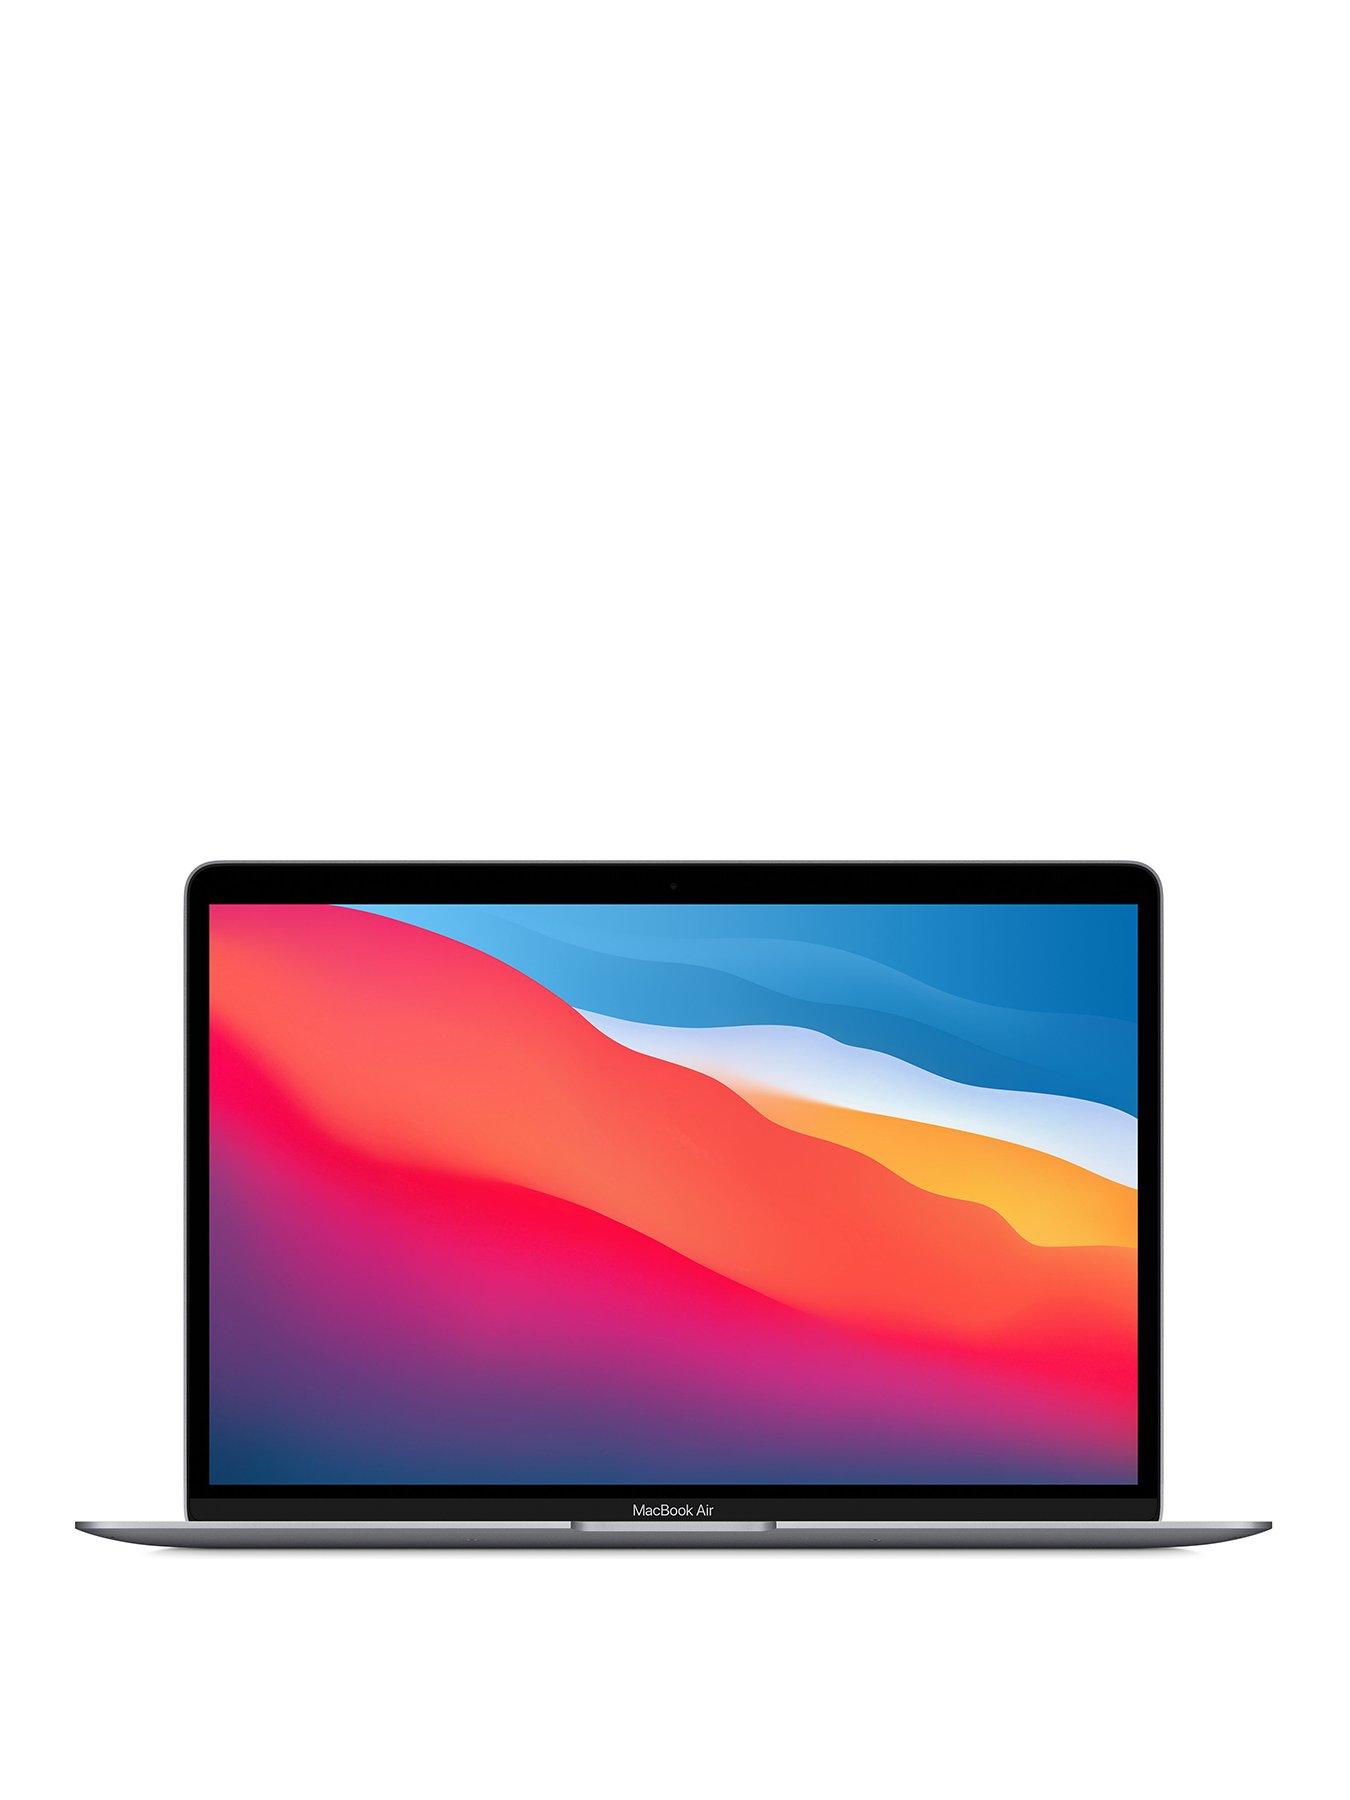 Apple MacBook Air (M1, 2020) 13 inch with 8-Core CPU and 7